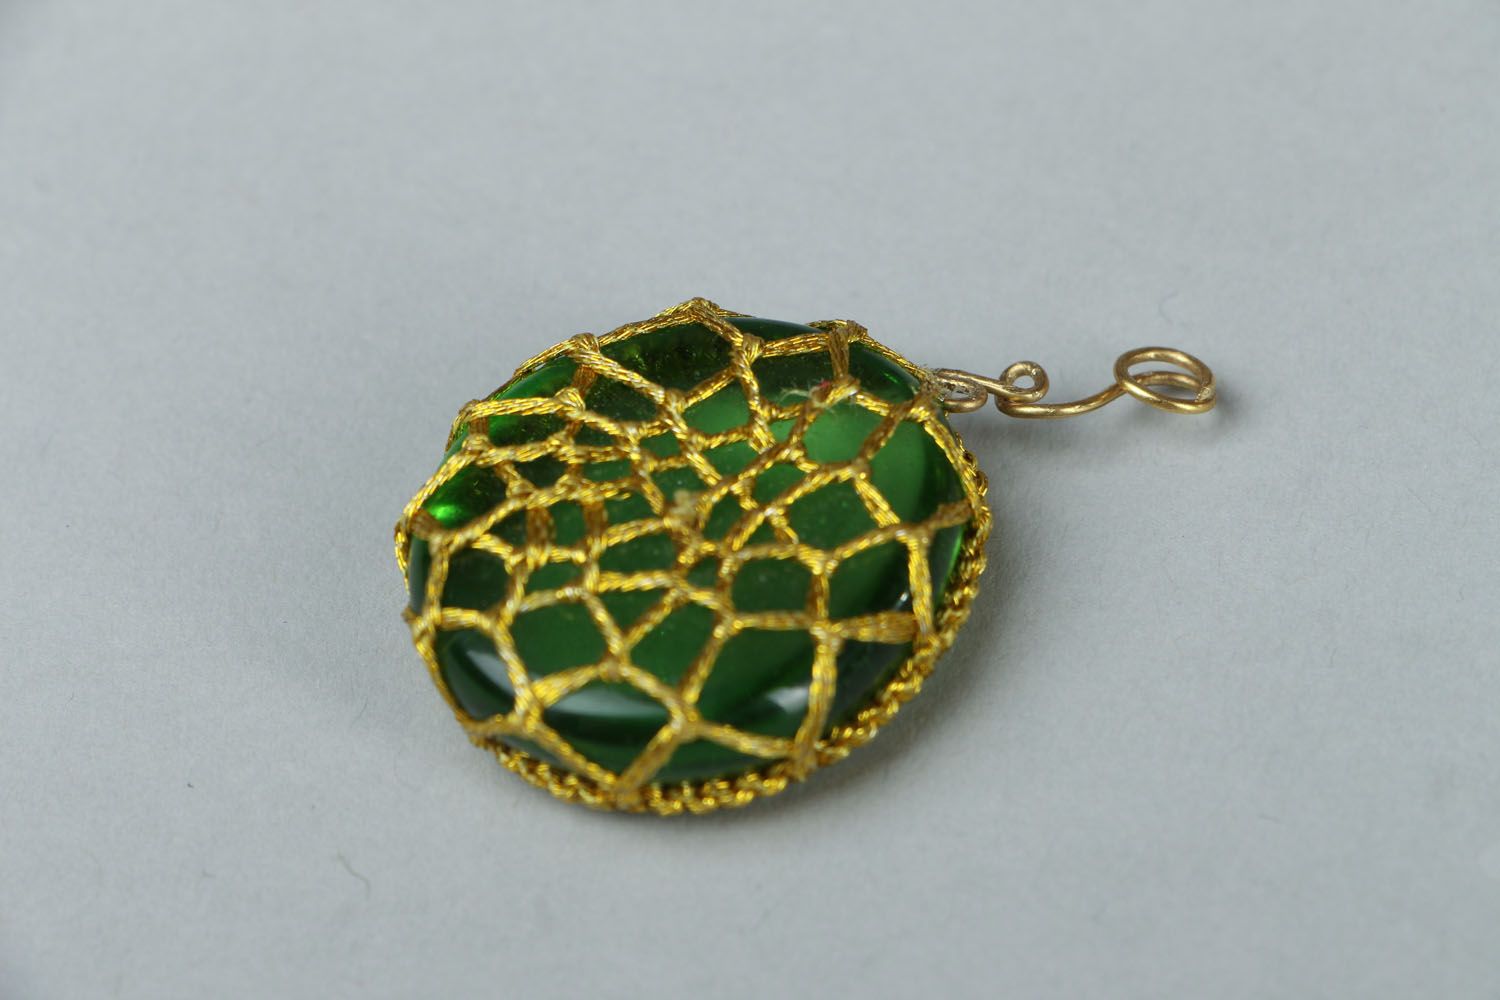 Pendant made of glass and thread photo 3